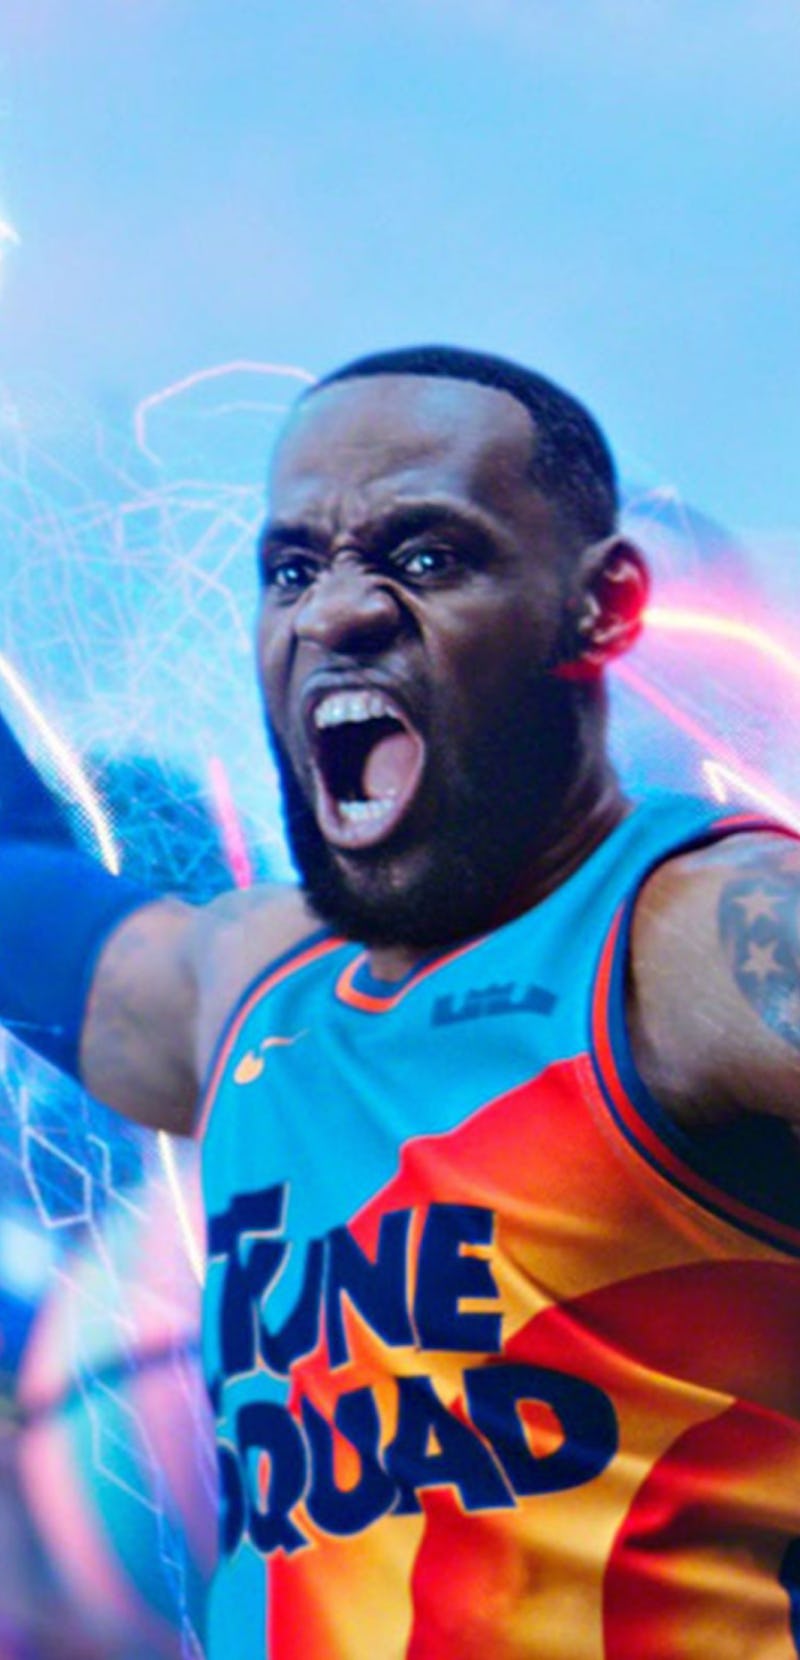 lebron james from space jam a new legacy